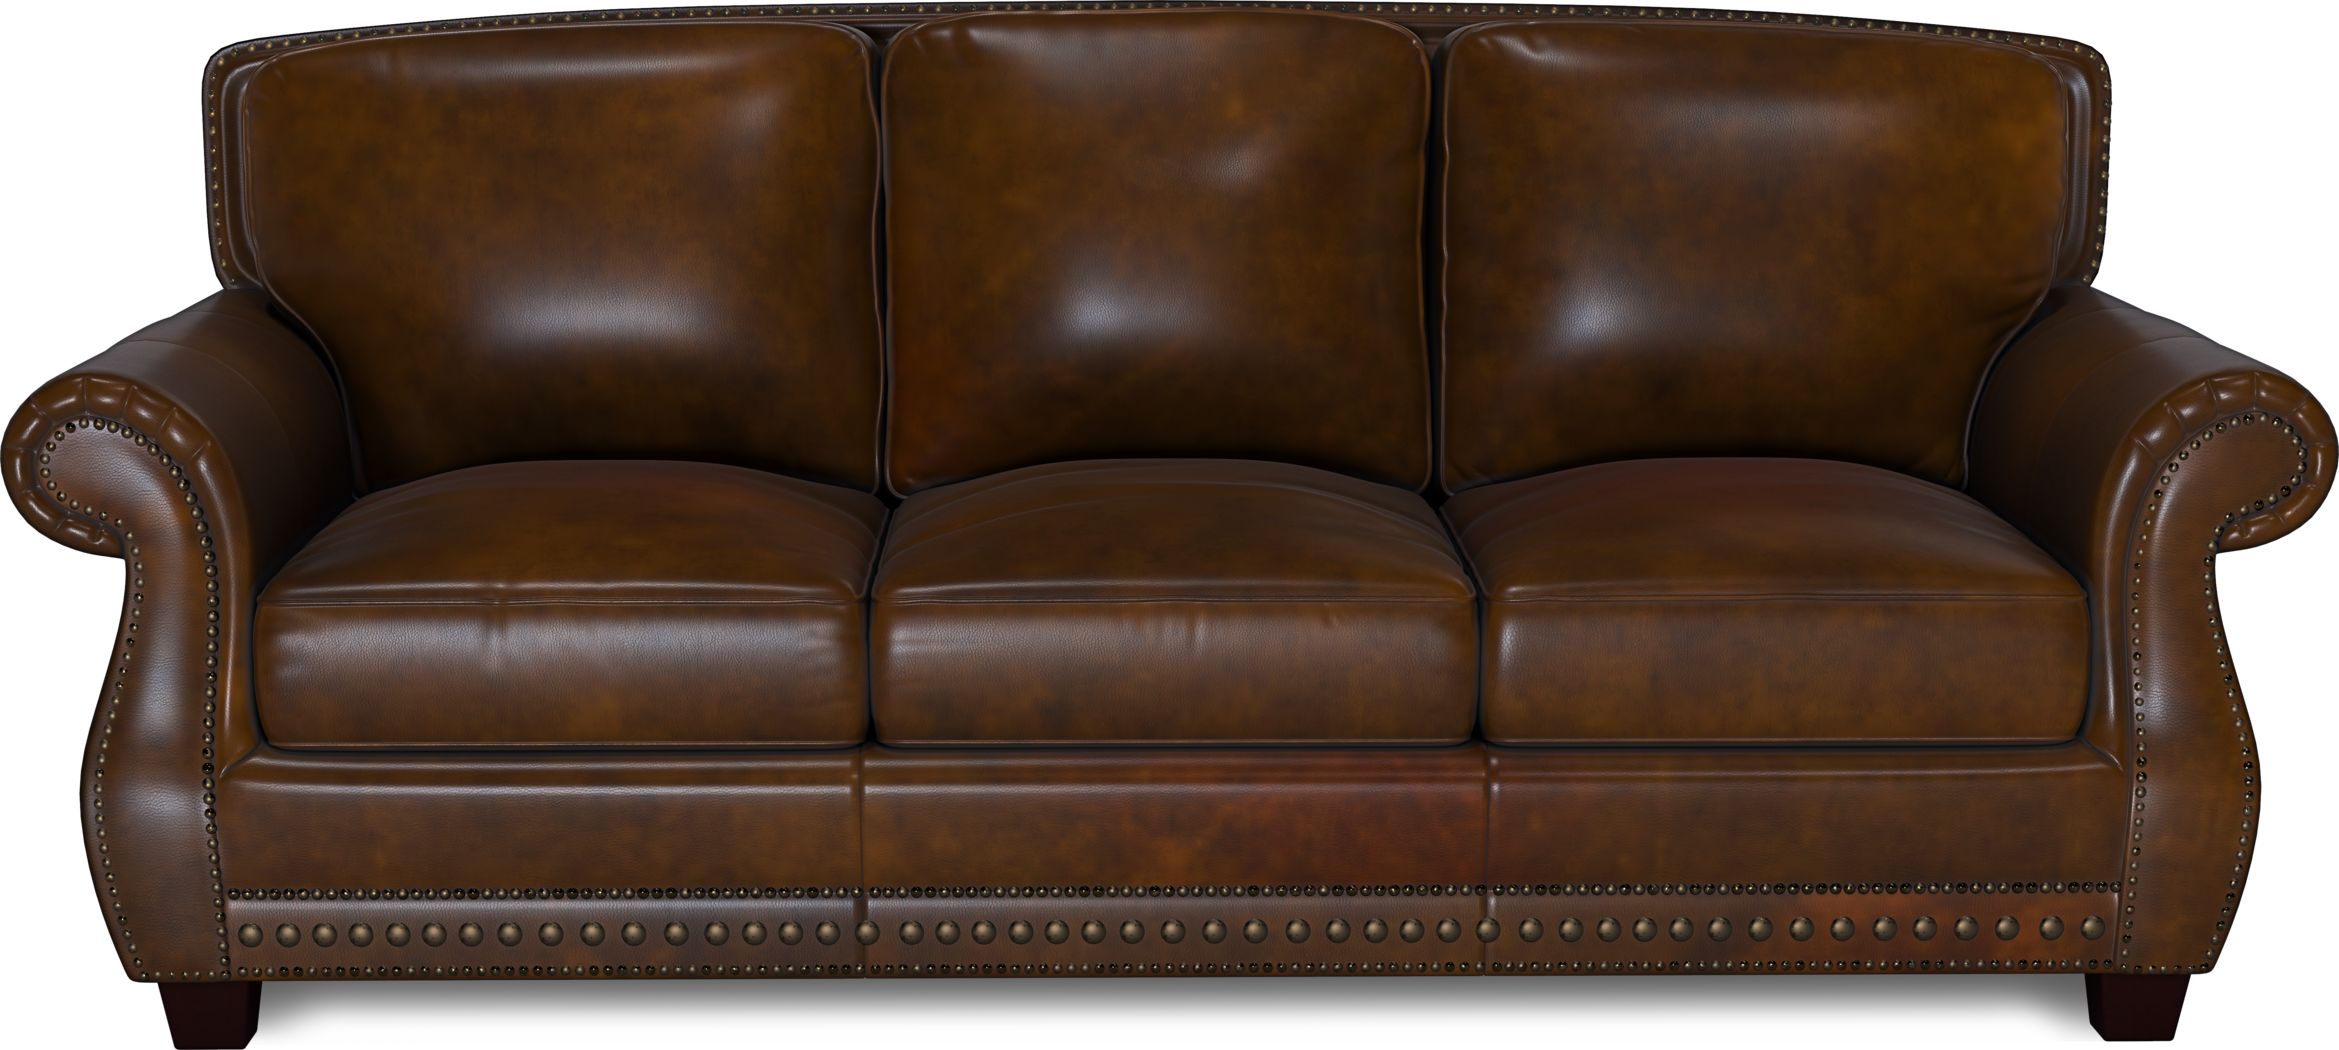 Brown Sleeper Sofa Beds Pull Out Couches, Brown Faux Leather Sleeper Sofa